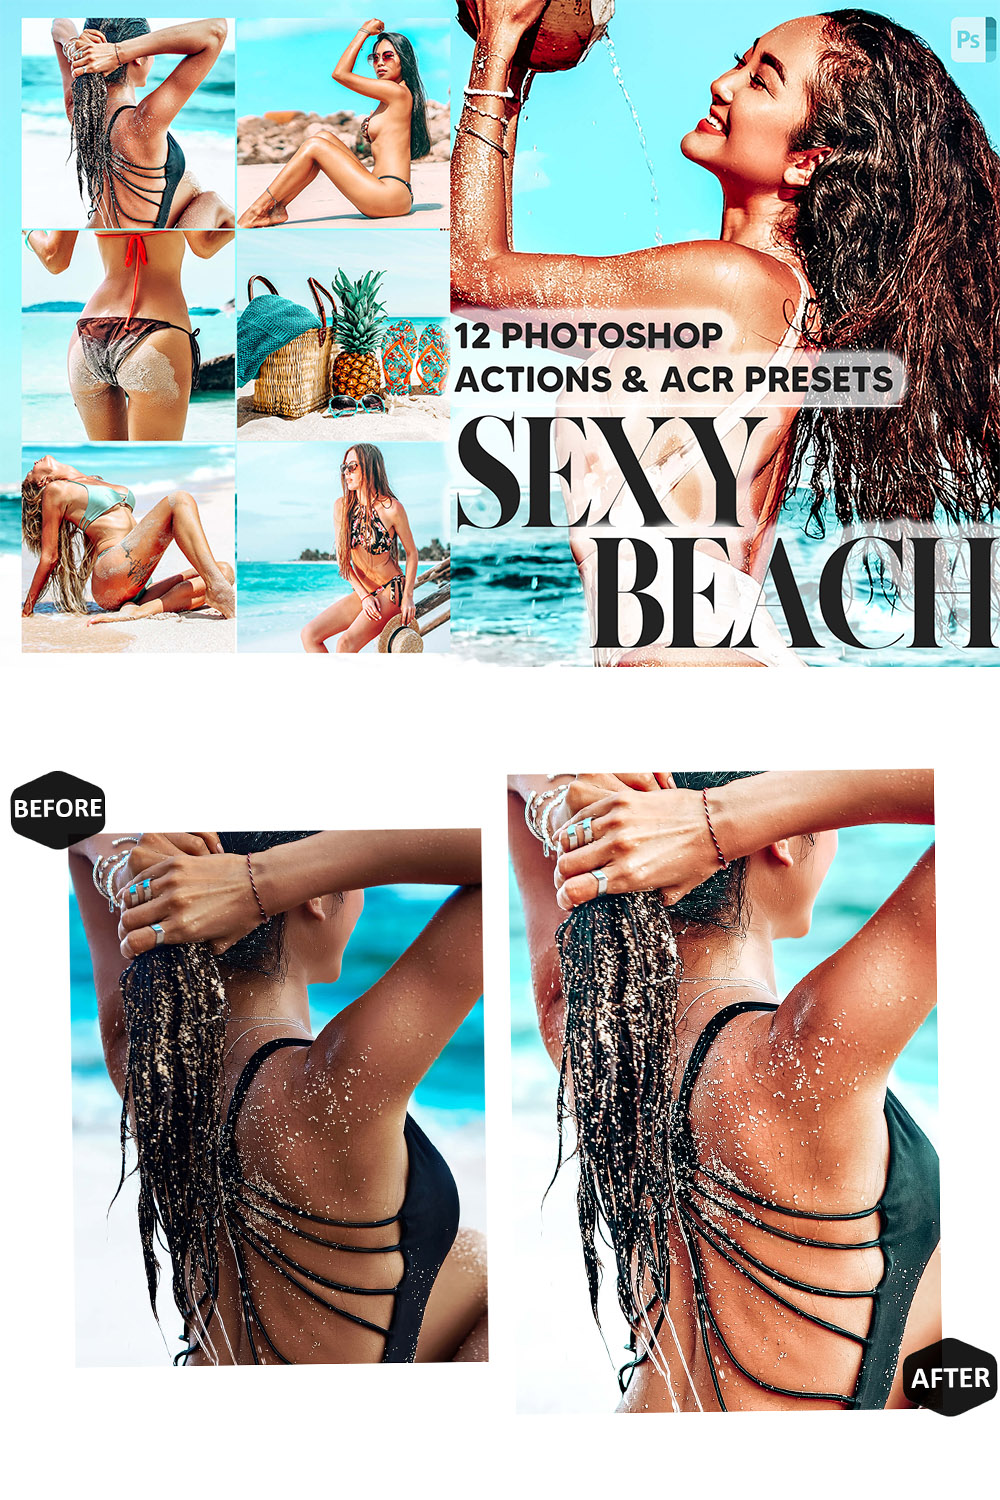 12 Photoshop Actions, Sexy Beach Ps Action, Ocean ACR Preset, Summer Ps Filter, Atn Portrait And Lifestyle Theme For Instagram, Blogger pinterest preview image.